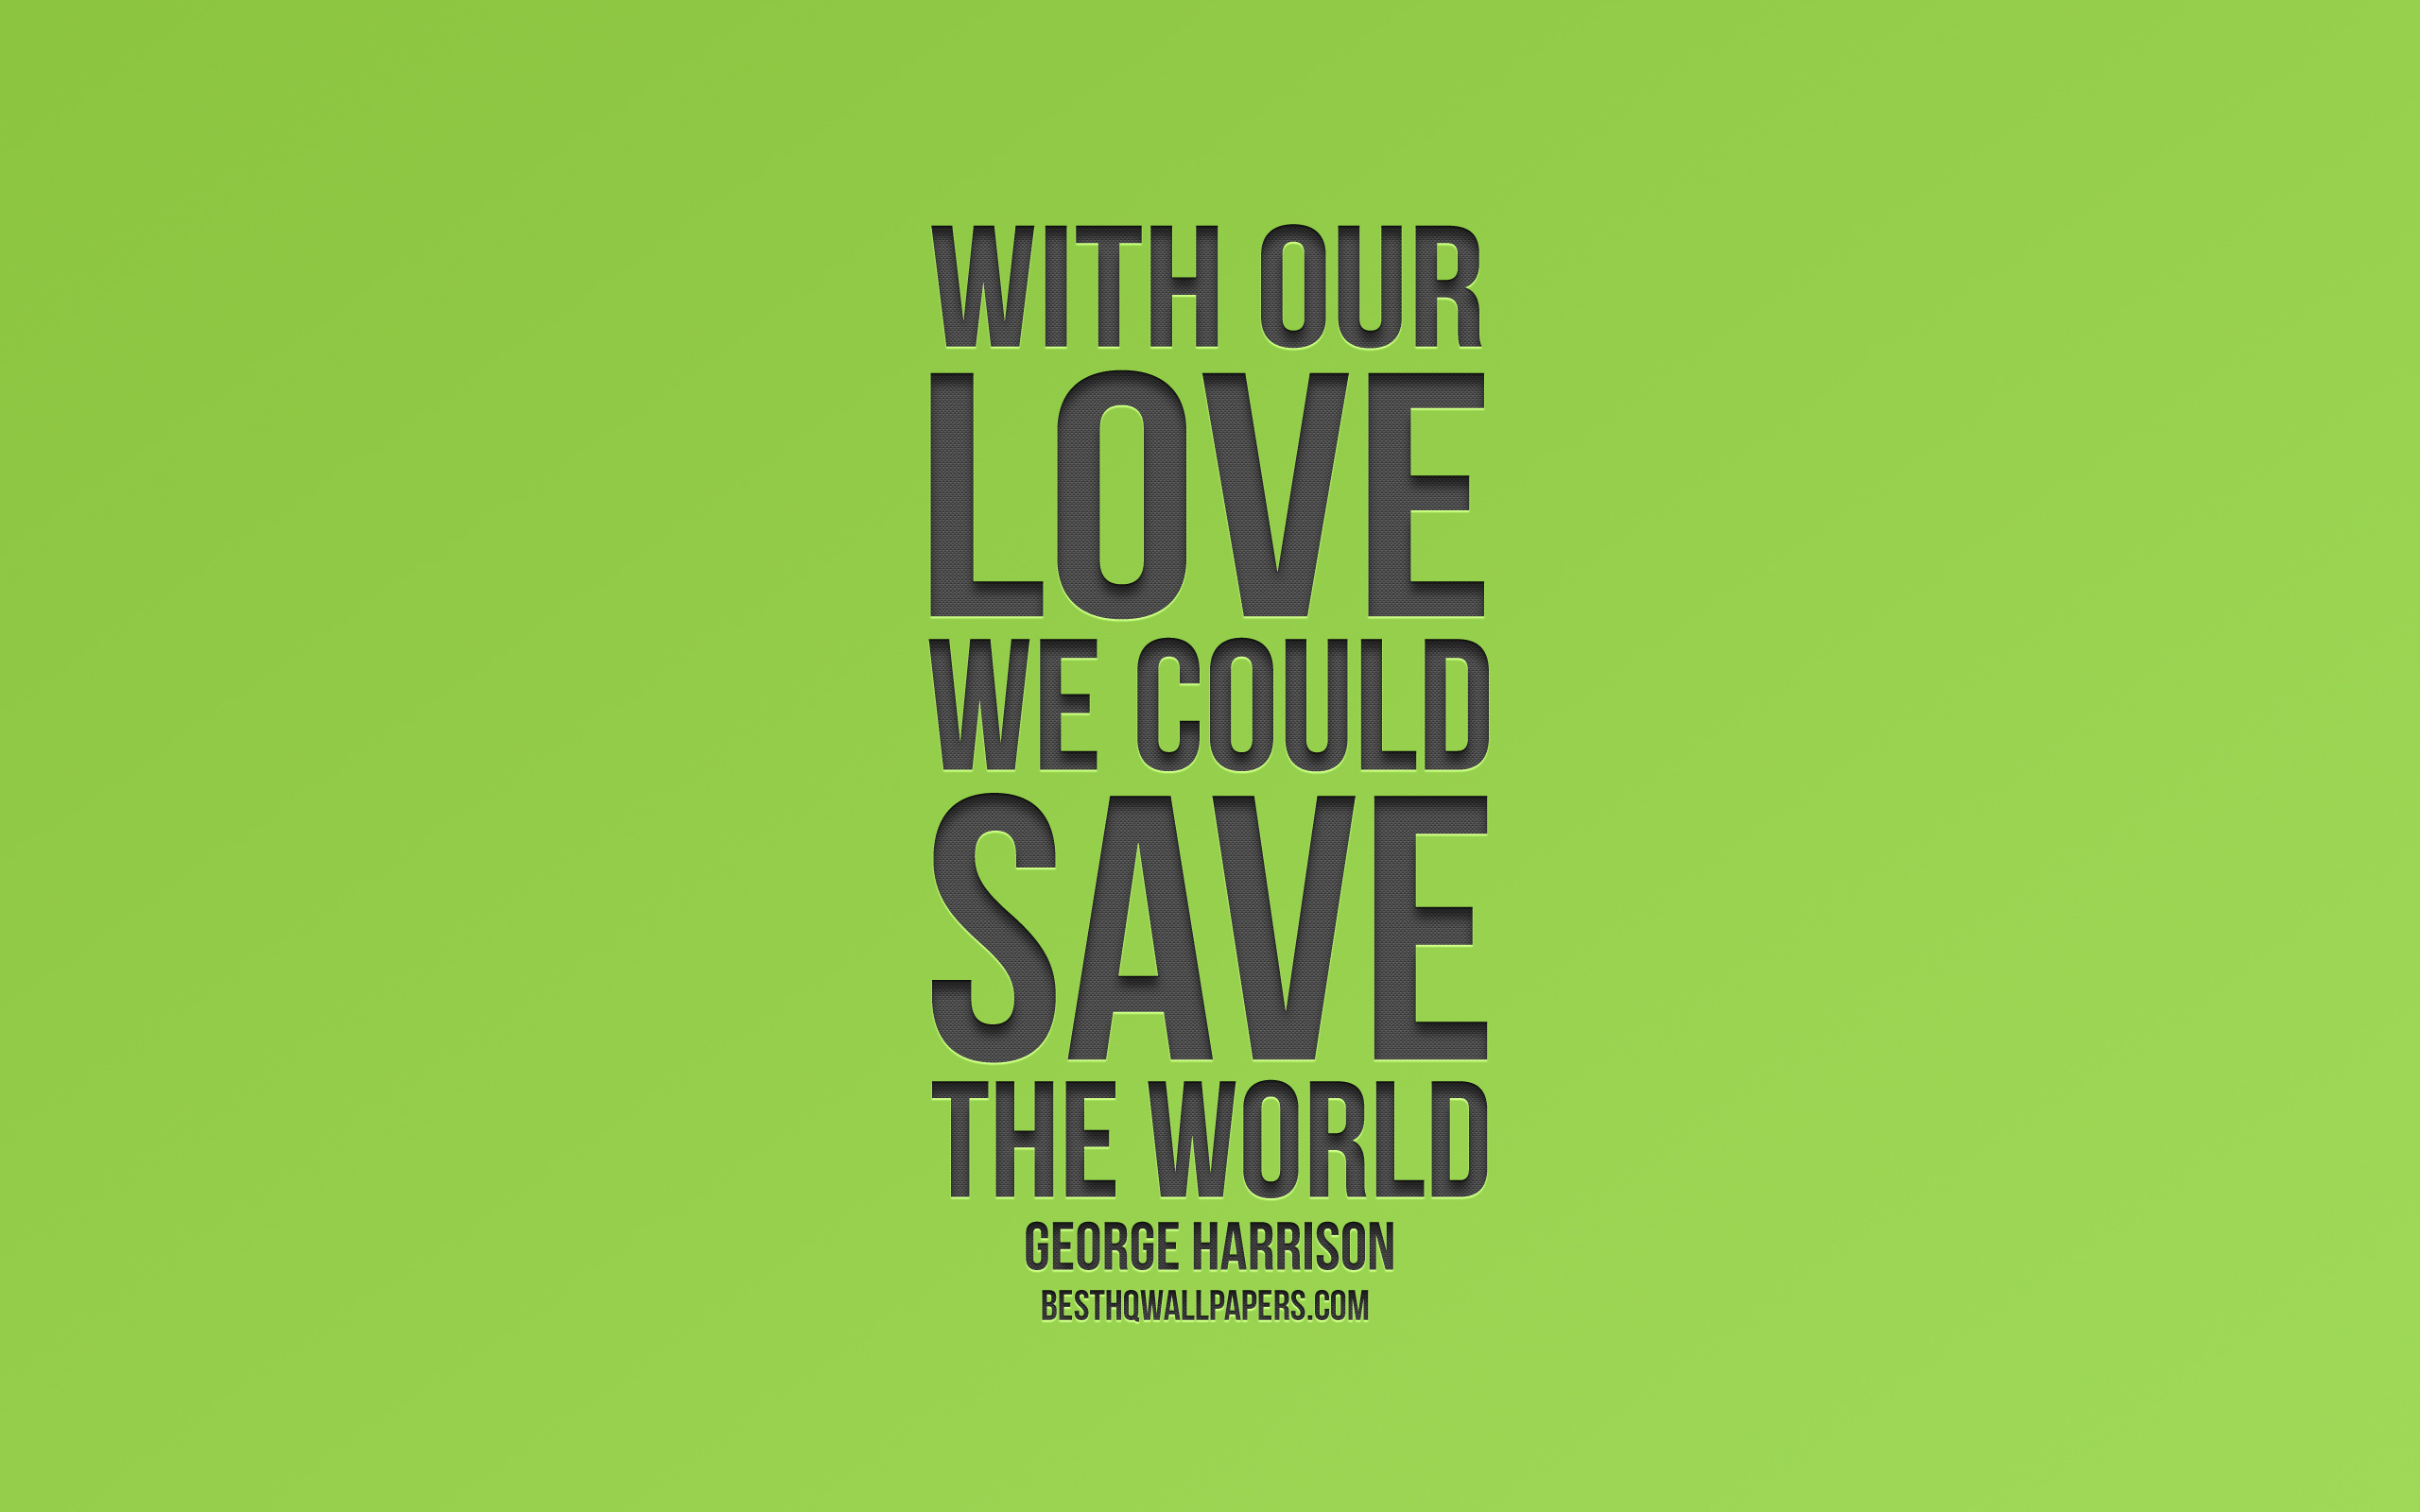 With Our Love We Could Save The World, George Harrison - Love Quotes Green Background - HD Wallpaper 